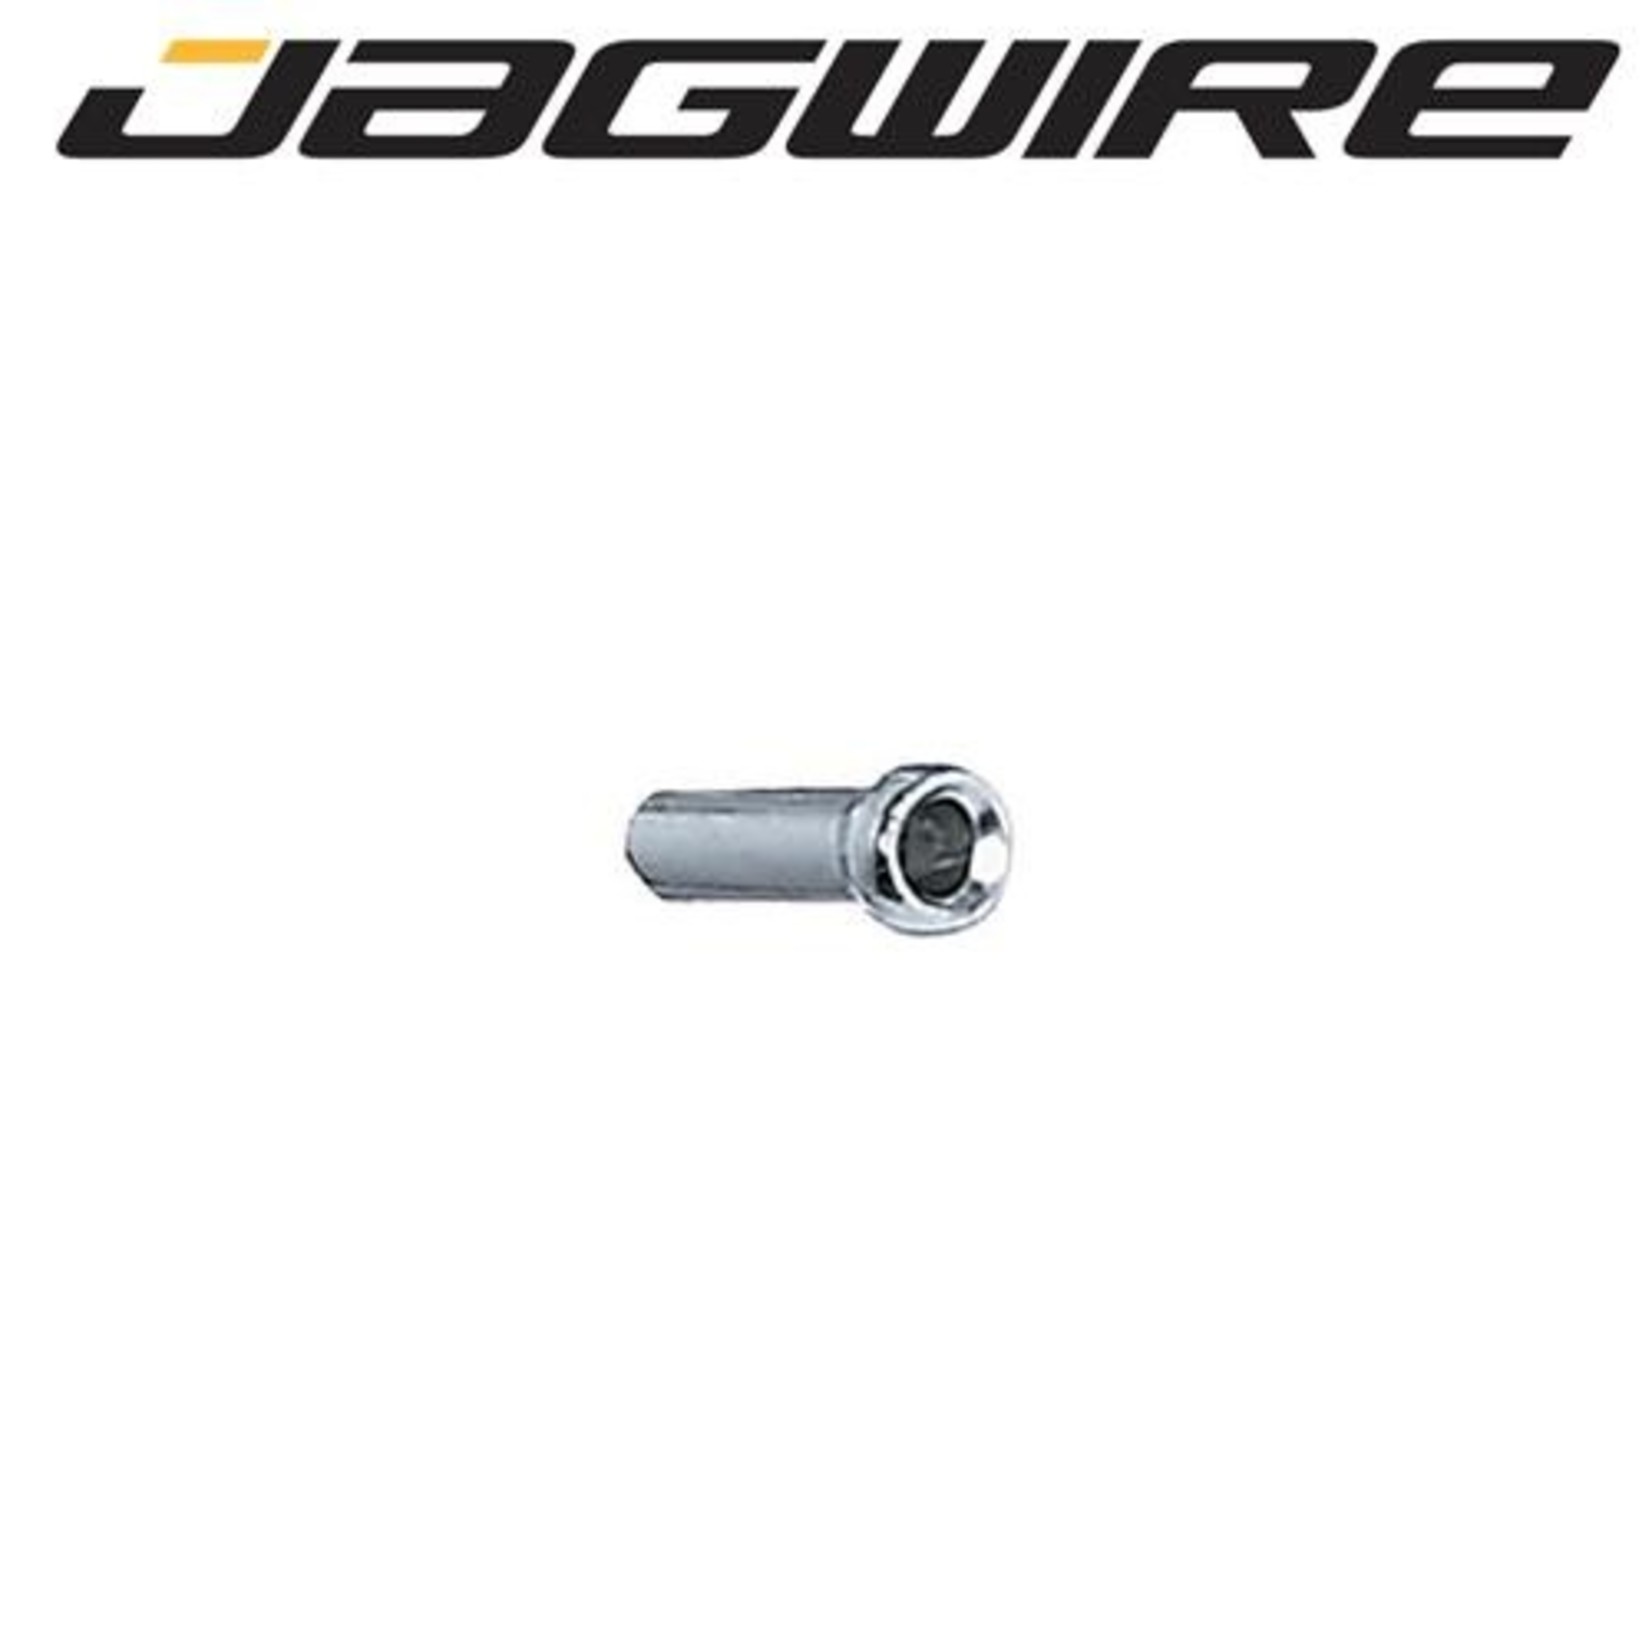 Jagwire Jagwire Bicycle Cable End Protector 500 Per Bottle - Silver